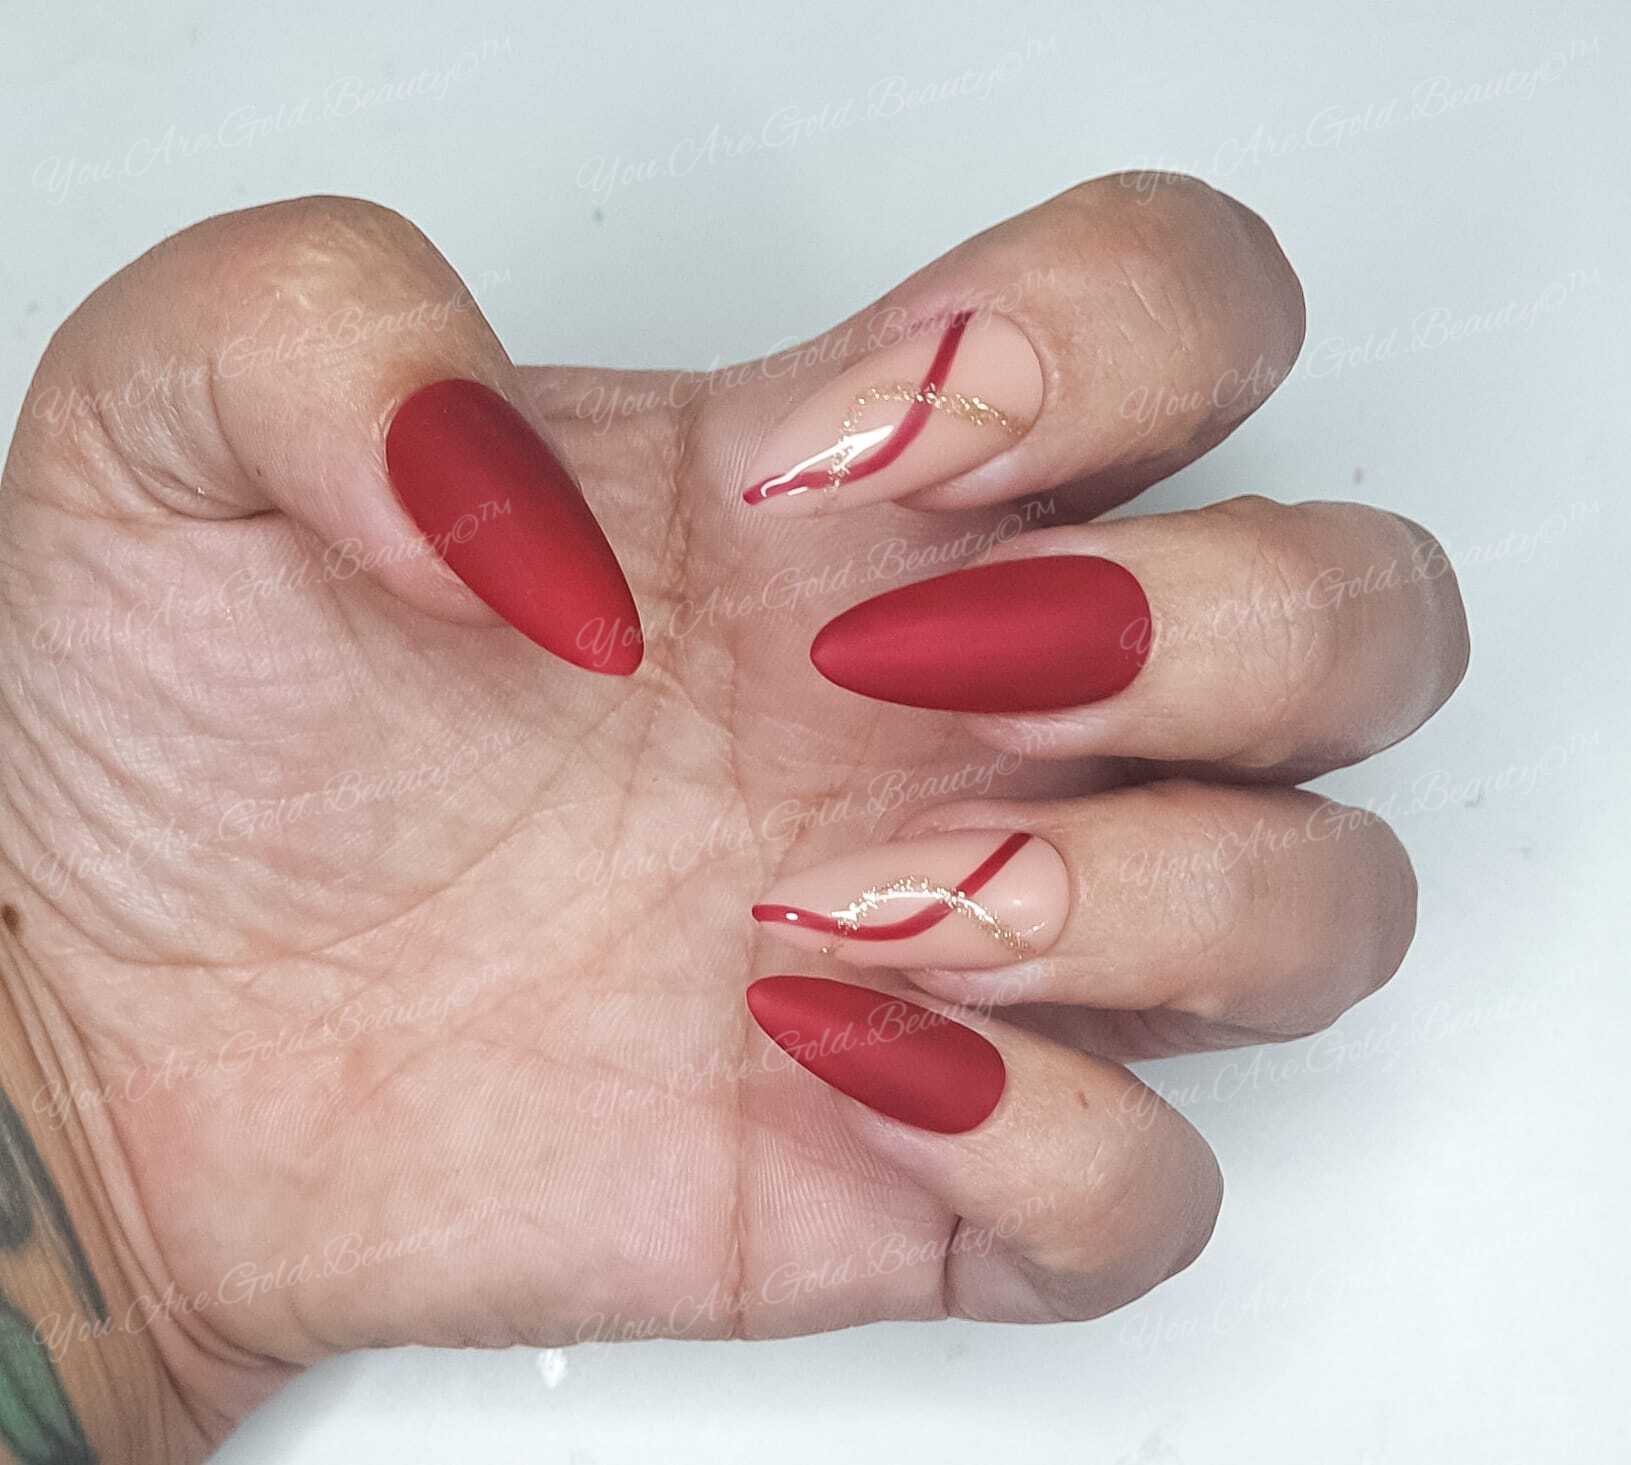 Rouge nails, red and gold nails, almond nails, almond shaped nails, press on nails uk, red nails, red nails designs, matte red nails, 2